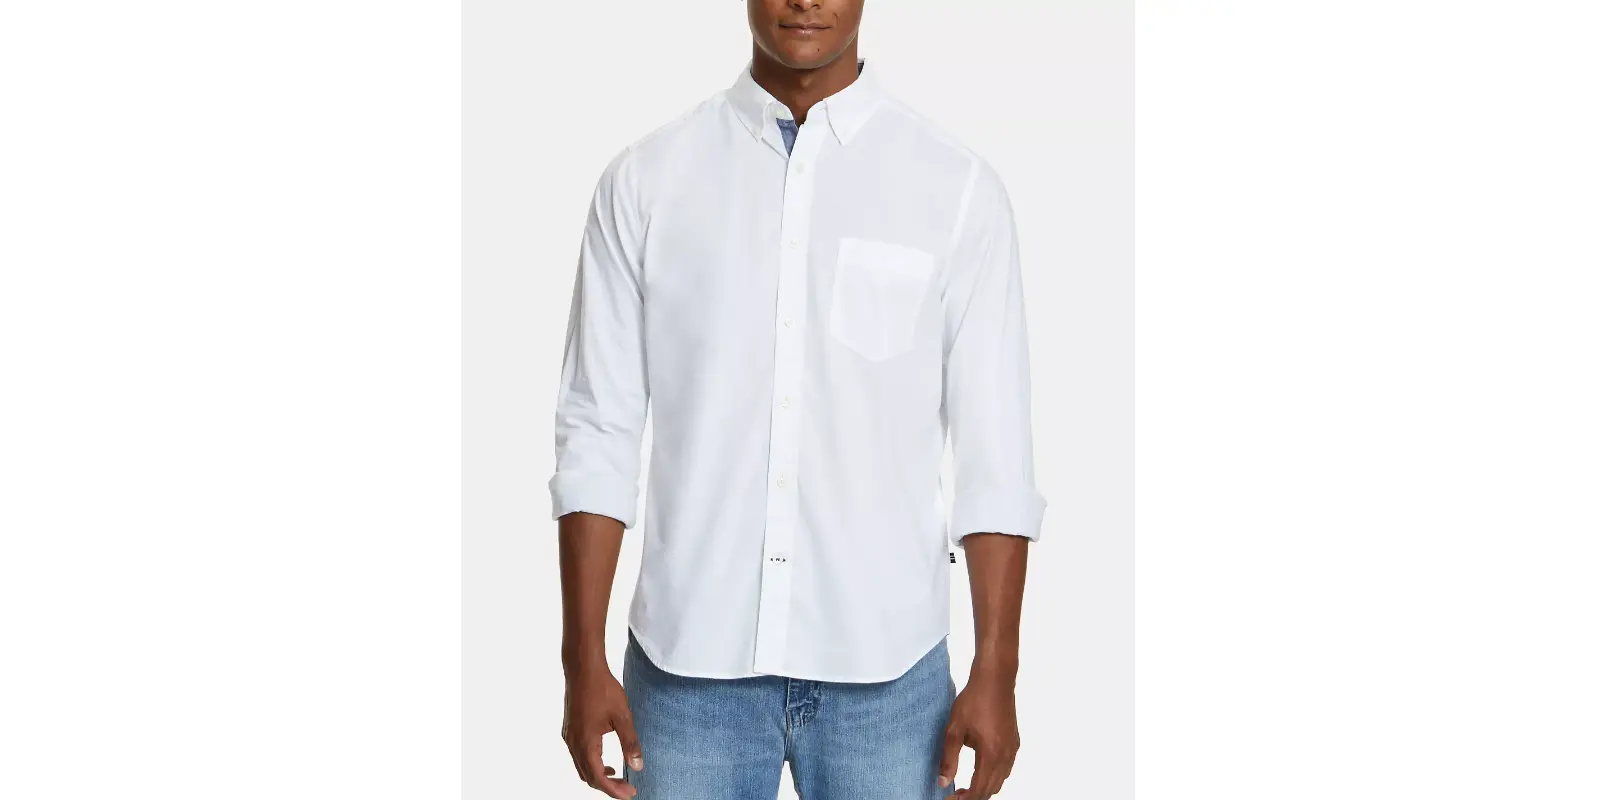 Macy - Nautica Men’s Classic-Fit Stretch Solid Oxford Button-Down Shirt